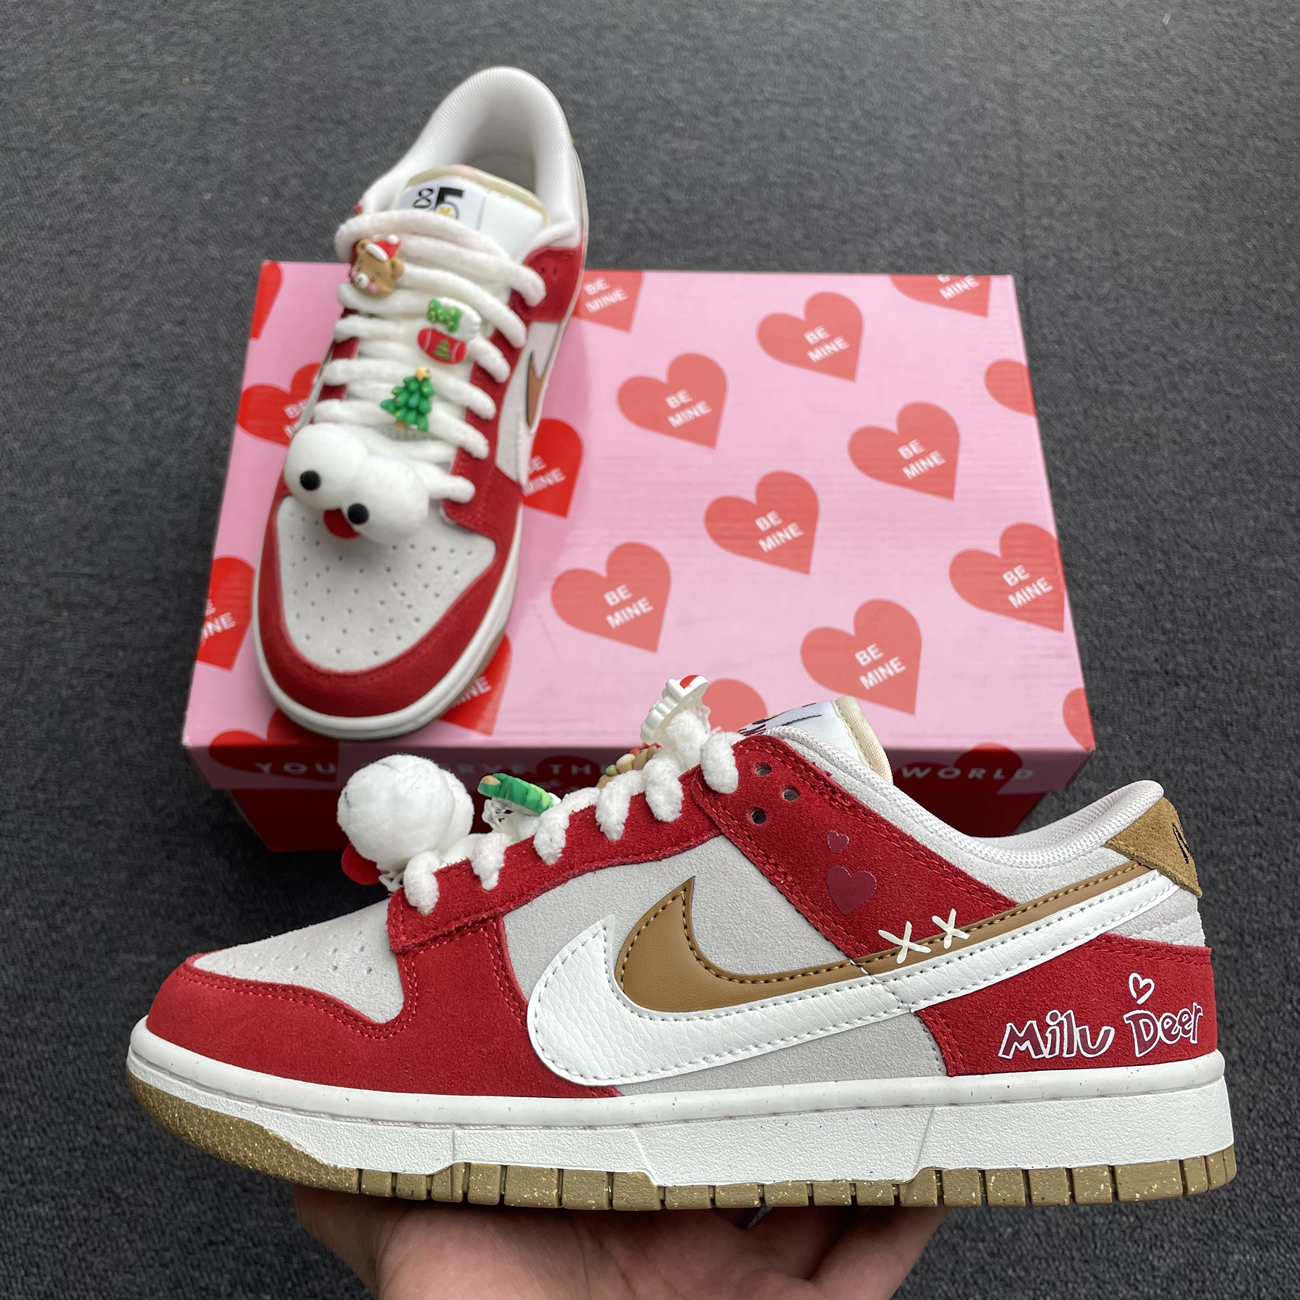 Nike Sb Dunk Low 85 Christmas Red White Brown Do9457 112 (2) - newkick.org